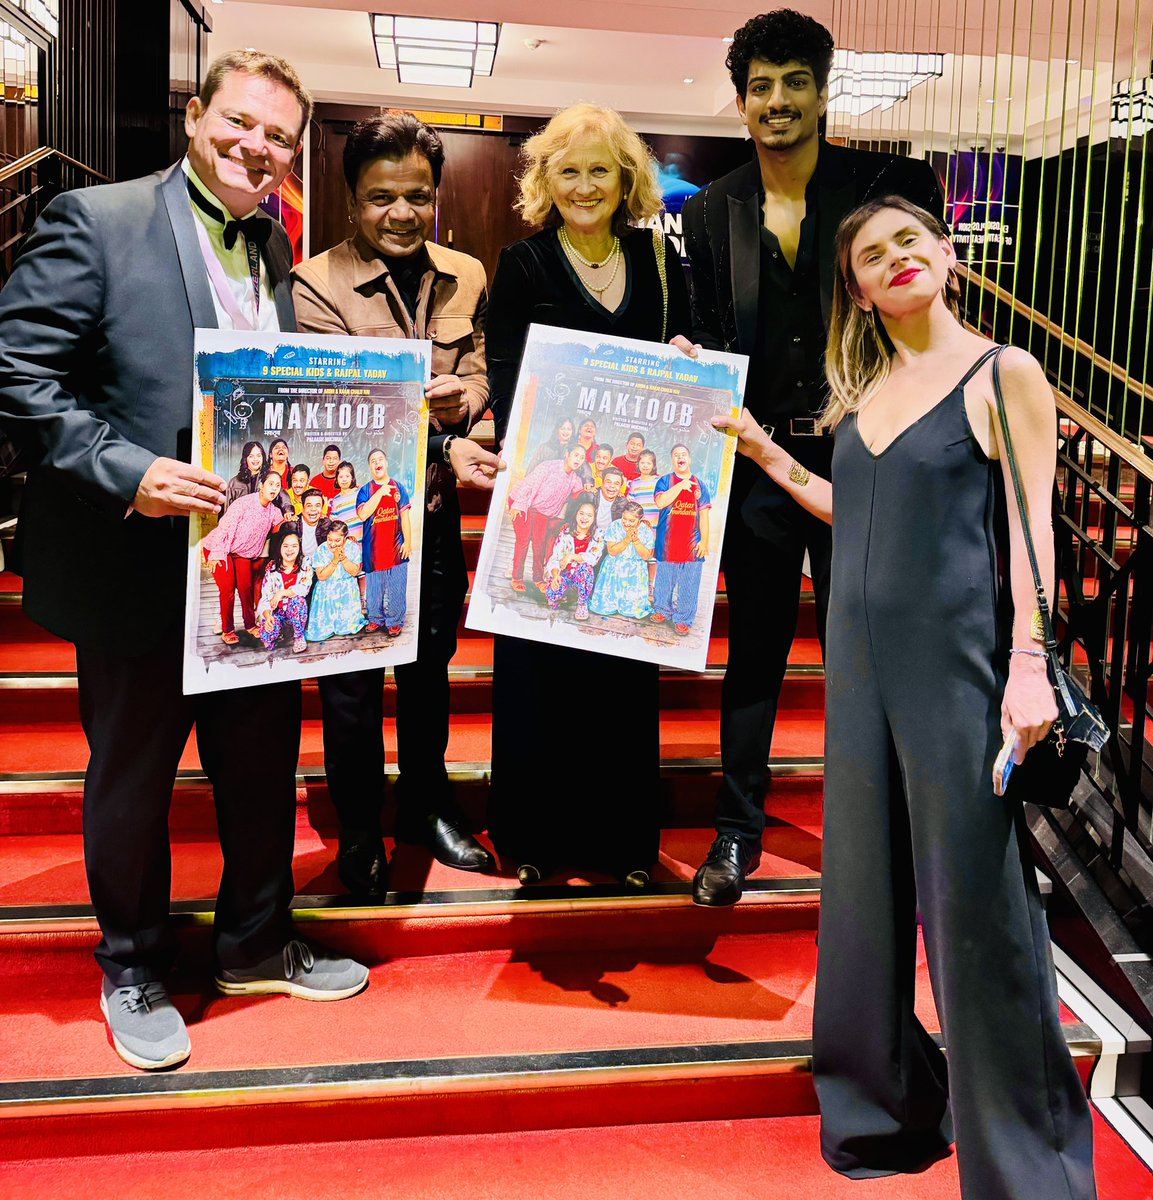 RAJPAL YADAV, PALAASH MUCHHAL LAUNCH NEW FILM POSTER AT CANNES… Actor #RajpalYadav and director - music composer - writer #PalaashMuchhal unveil #FirstLook poster of their new film #Maktoob at #CannesFilmFestival.

#Maktoob stars nine special kids with #RajpalYadav.